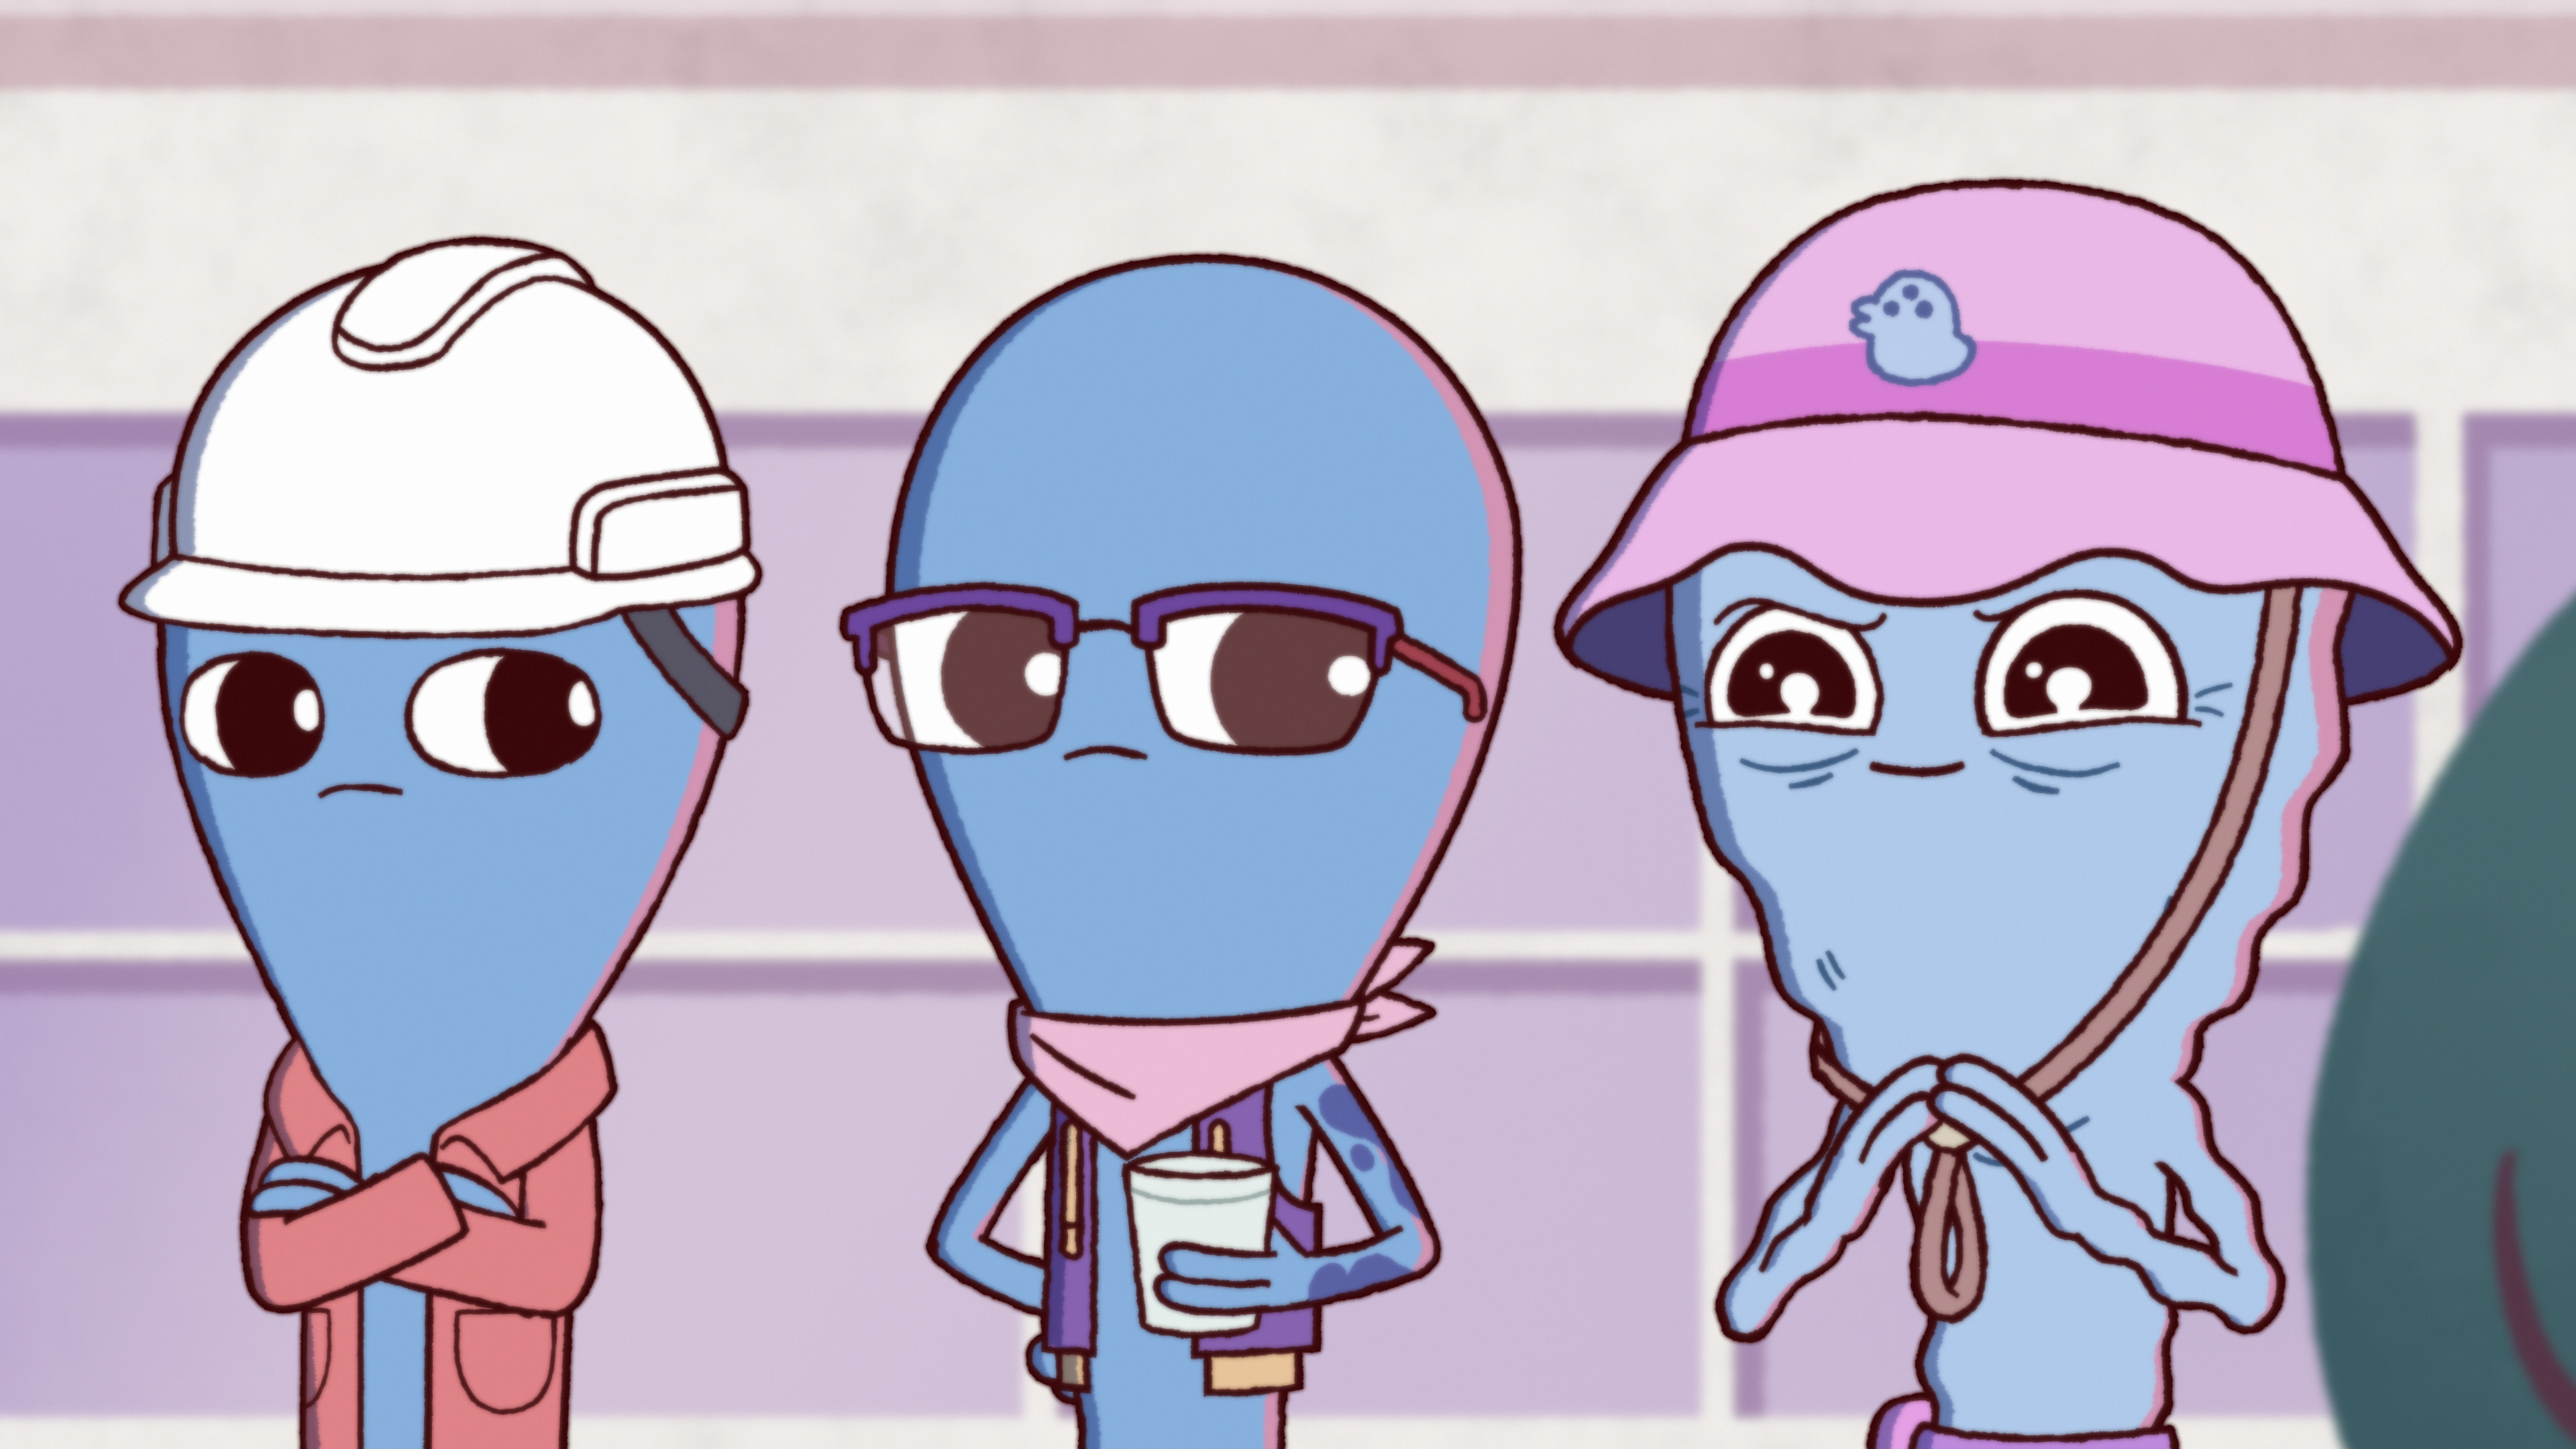 A group of three blue aliens waiting in line. The one in the back looks incredibly excited, and the two in front of him are side-eying him.